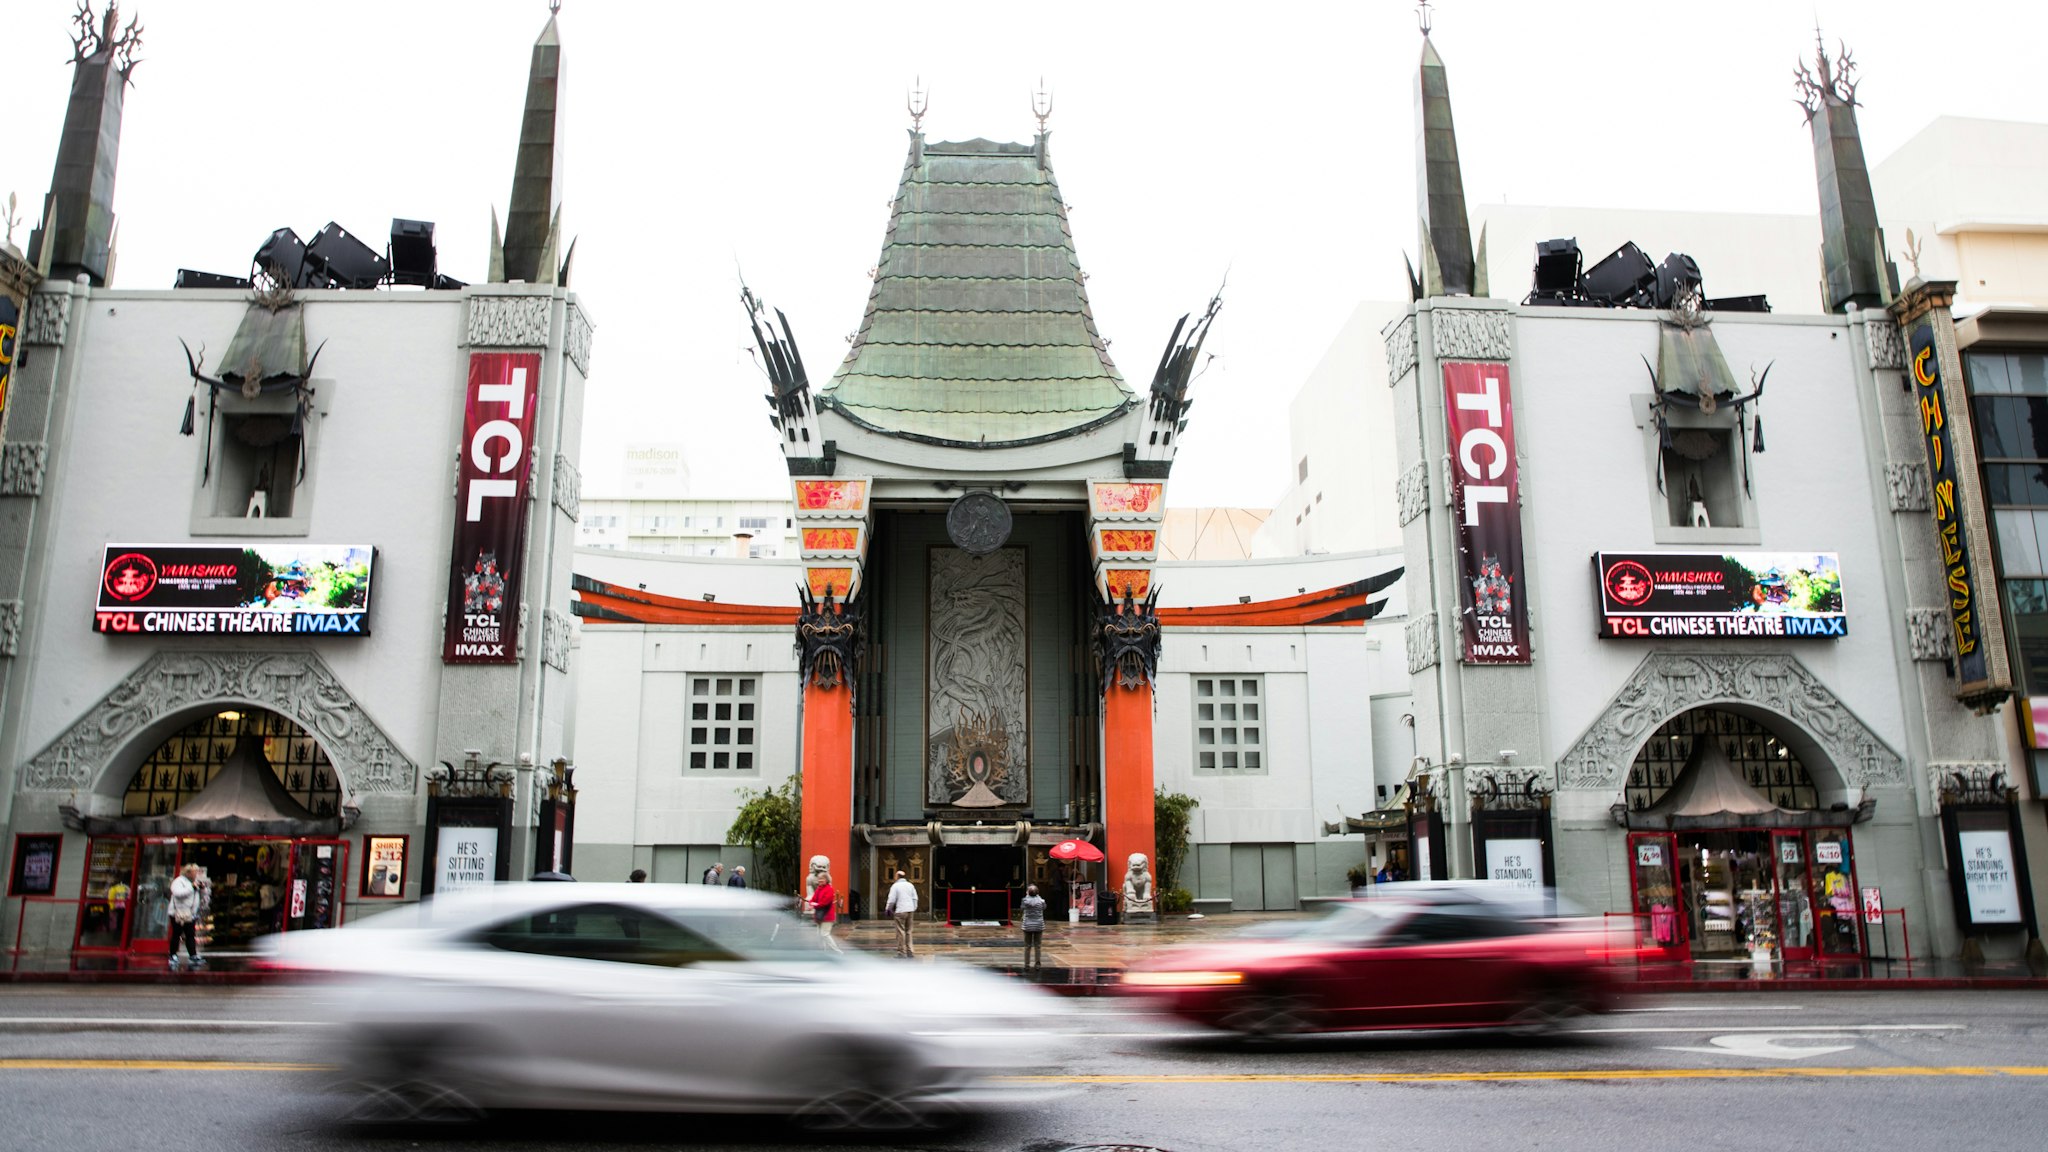 HOLLYWOOD, CALIFORNIA - MARCH 13: Visitors to the TCL Chinese Theatre are seen on March 13, 2020 in Hollywood, California. The spread of COVID-19 has negatively affected a wide range of industries all across the global economy. (Photo by Rich Fury/Getty Images)